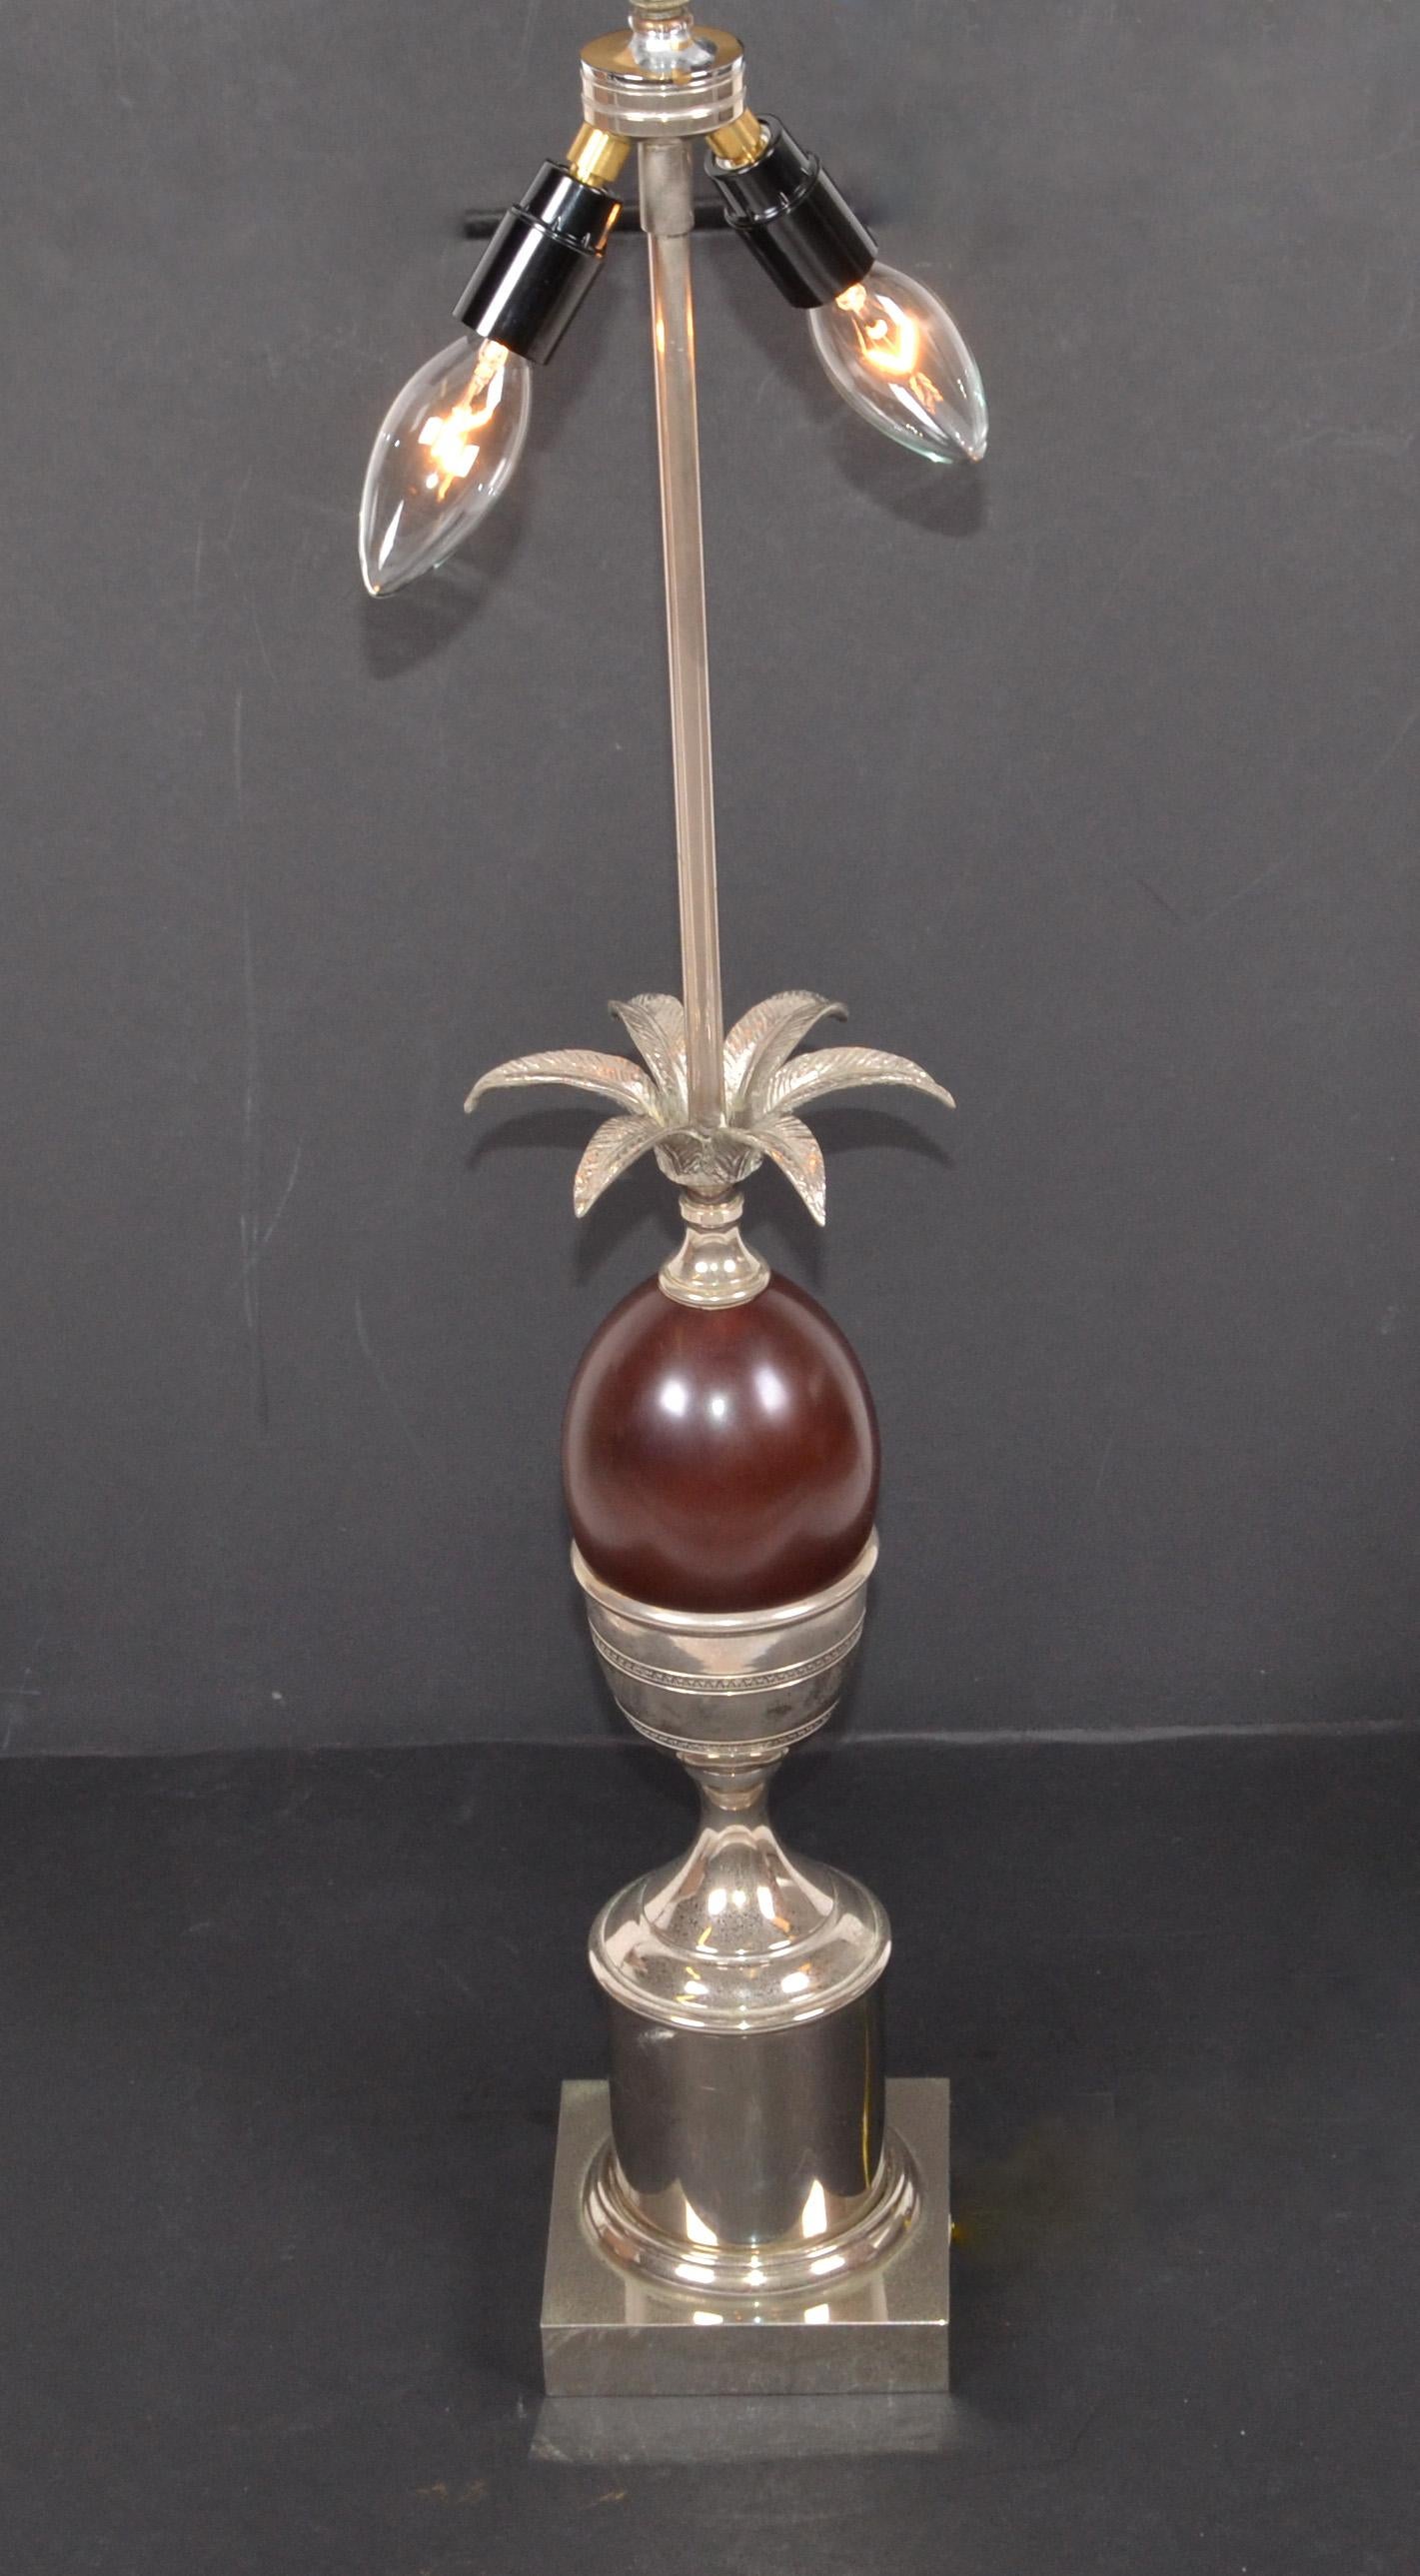 Maison Charles French Art Deco Red Acorn Nickel-Plated Table Lamp & Shade, 1950s For Sale 3